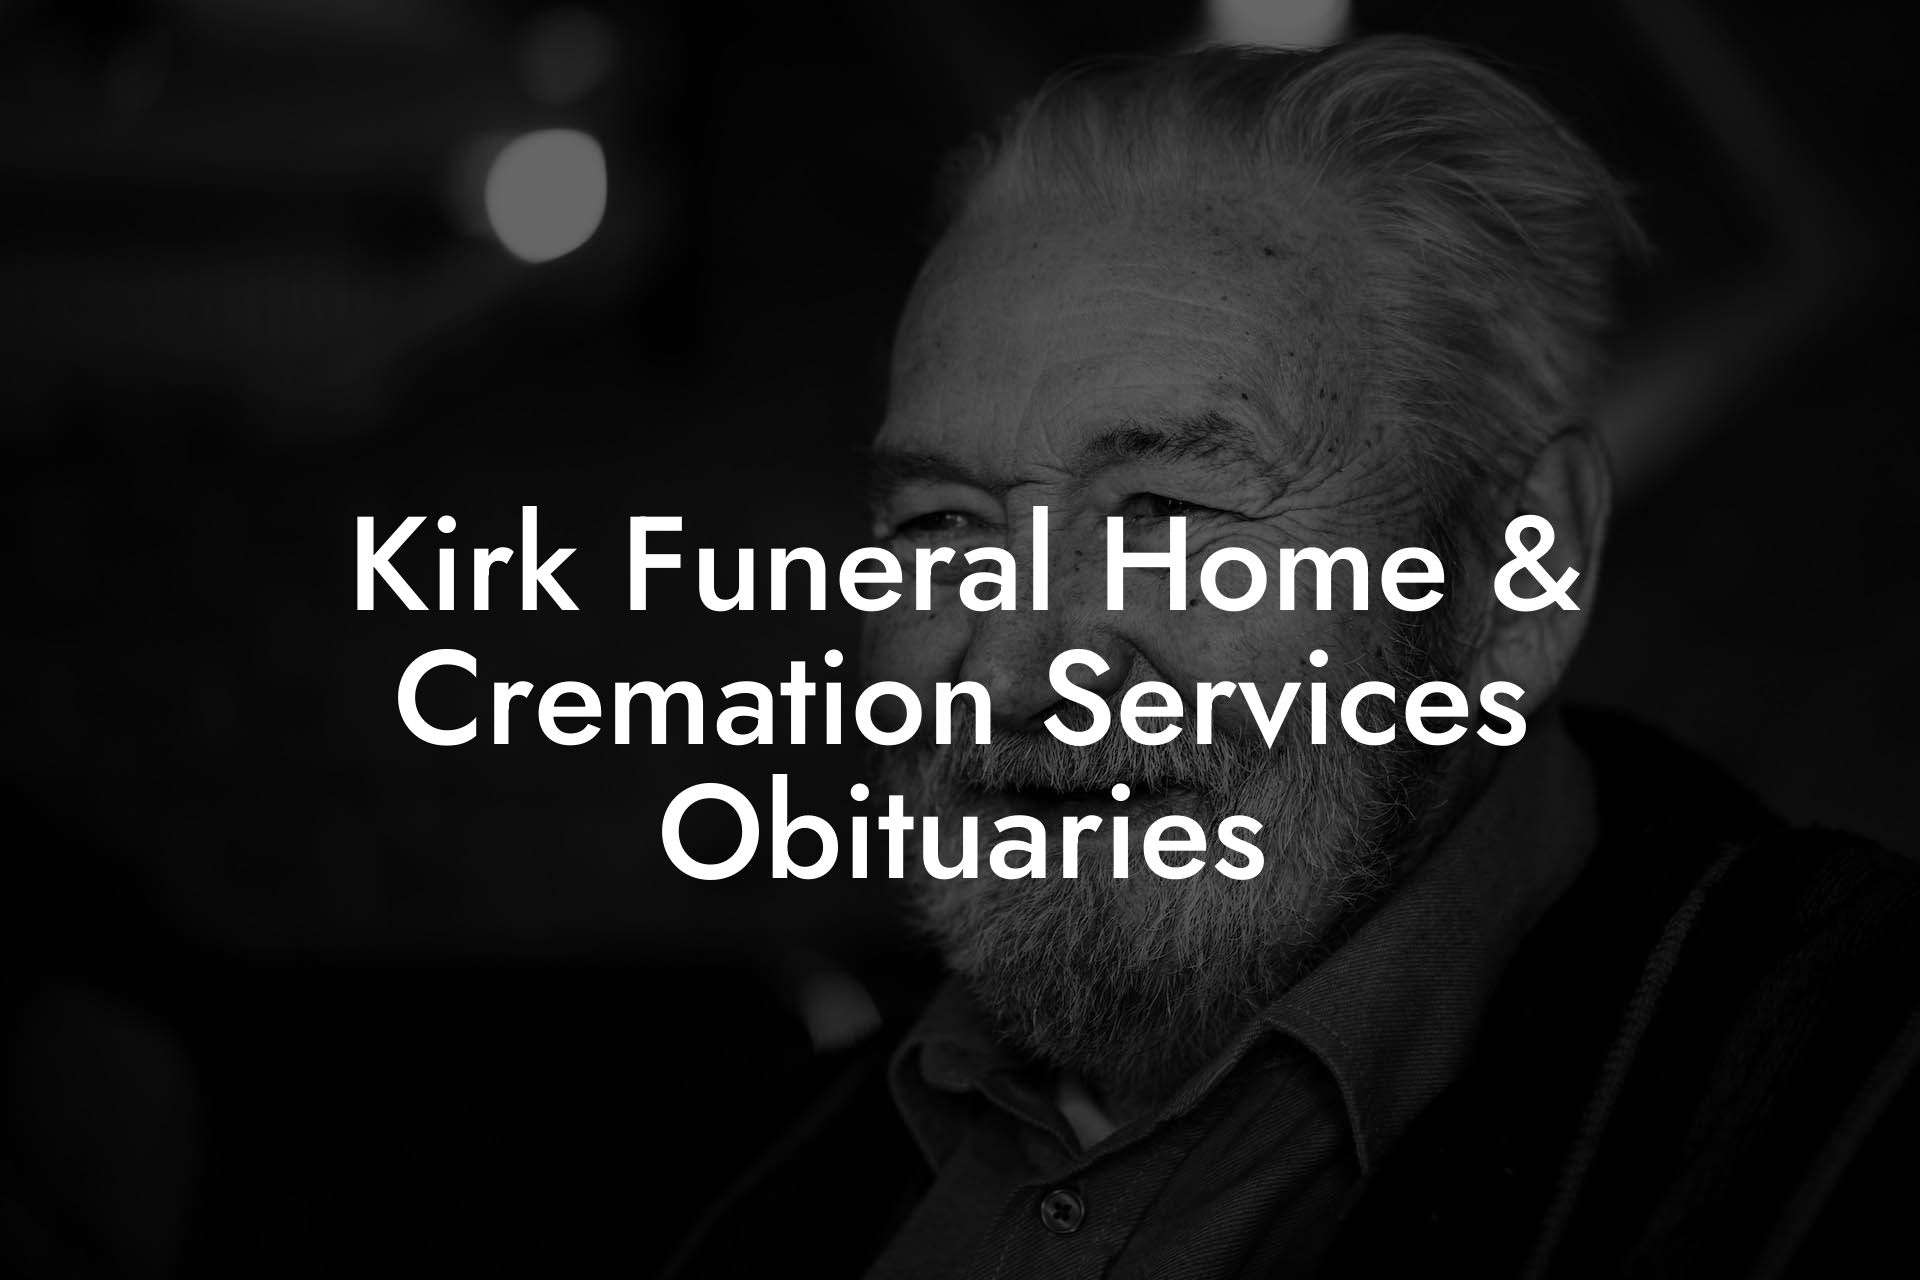 Kirk Funeral Home & Cremation Services Obituaries